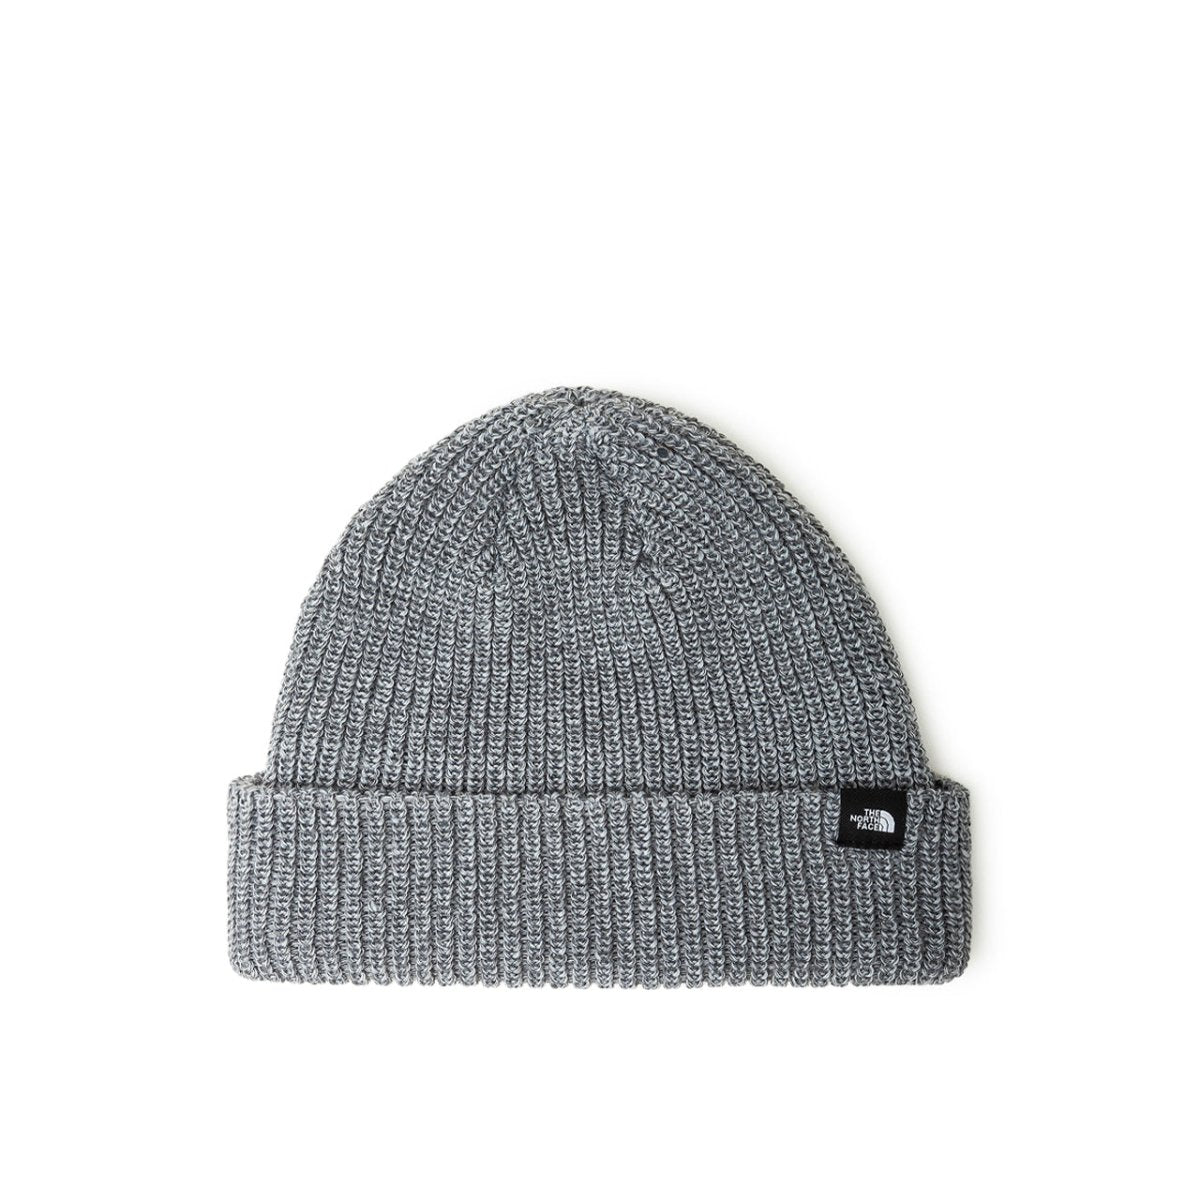 Image of The North Face Fisherman Beanie (Grey)